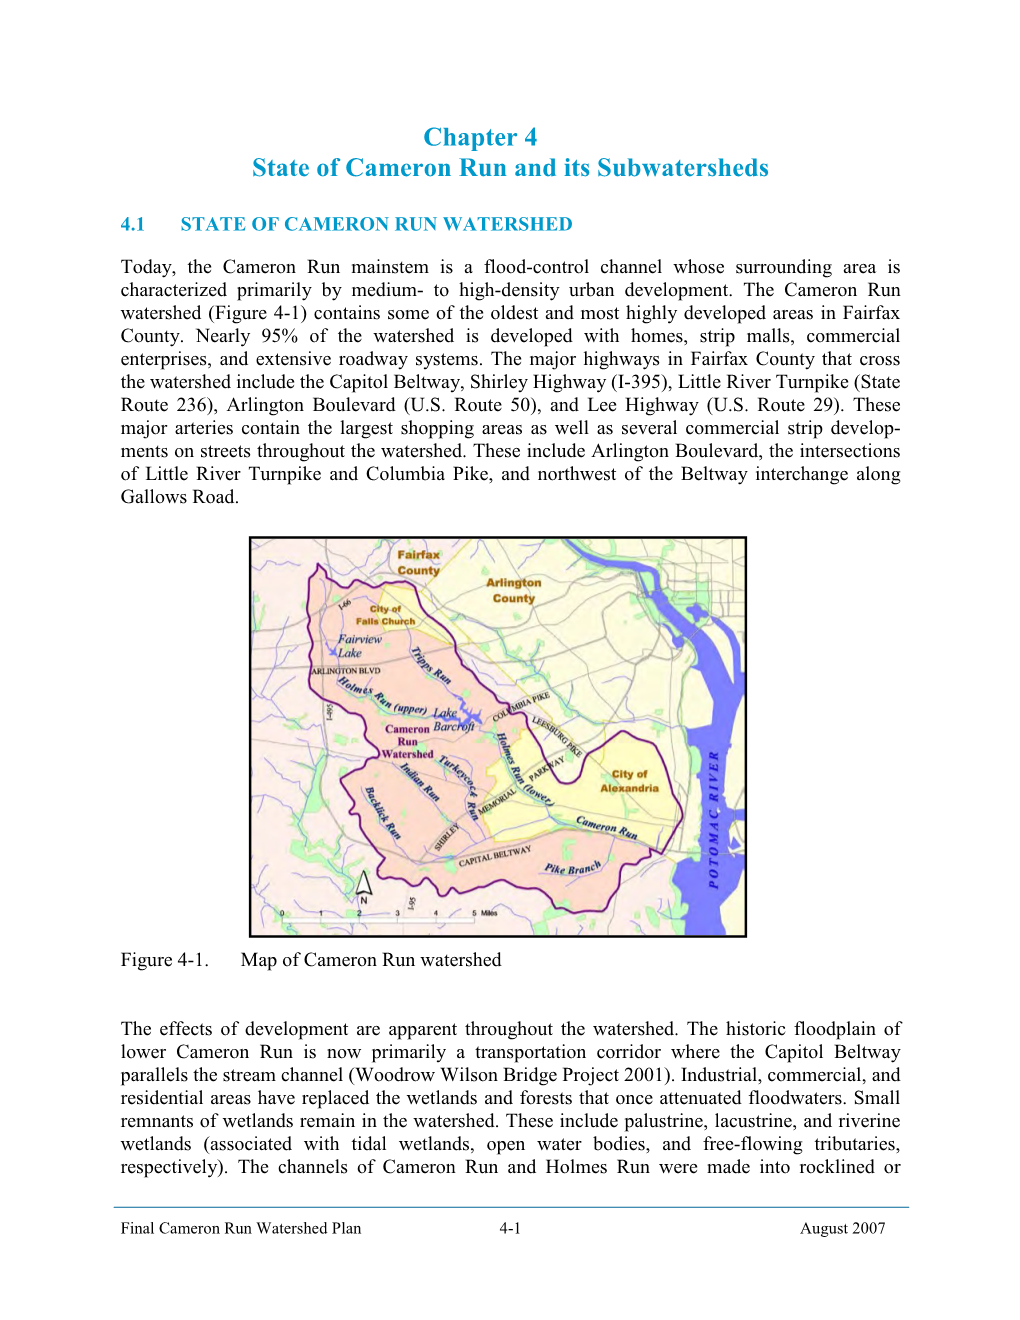 Chapter 4 State of Cameron Run and Its Subwatersheds